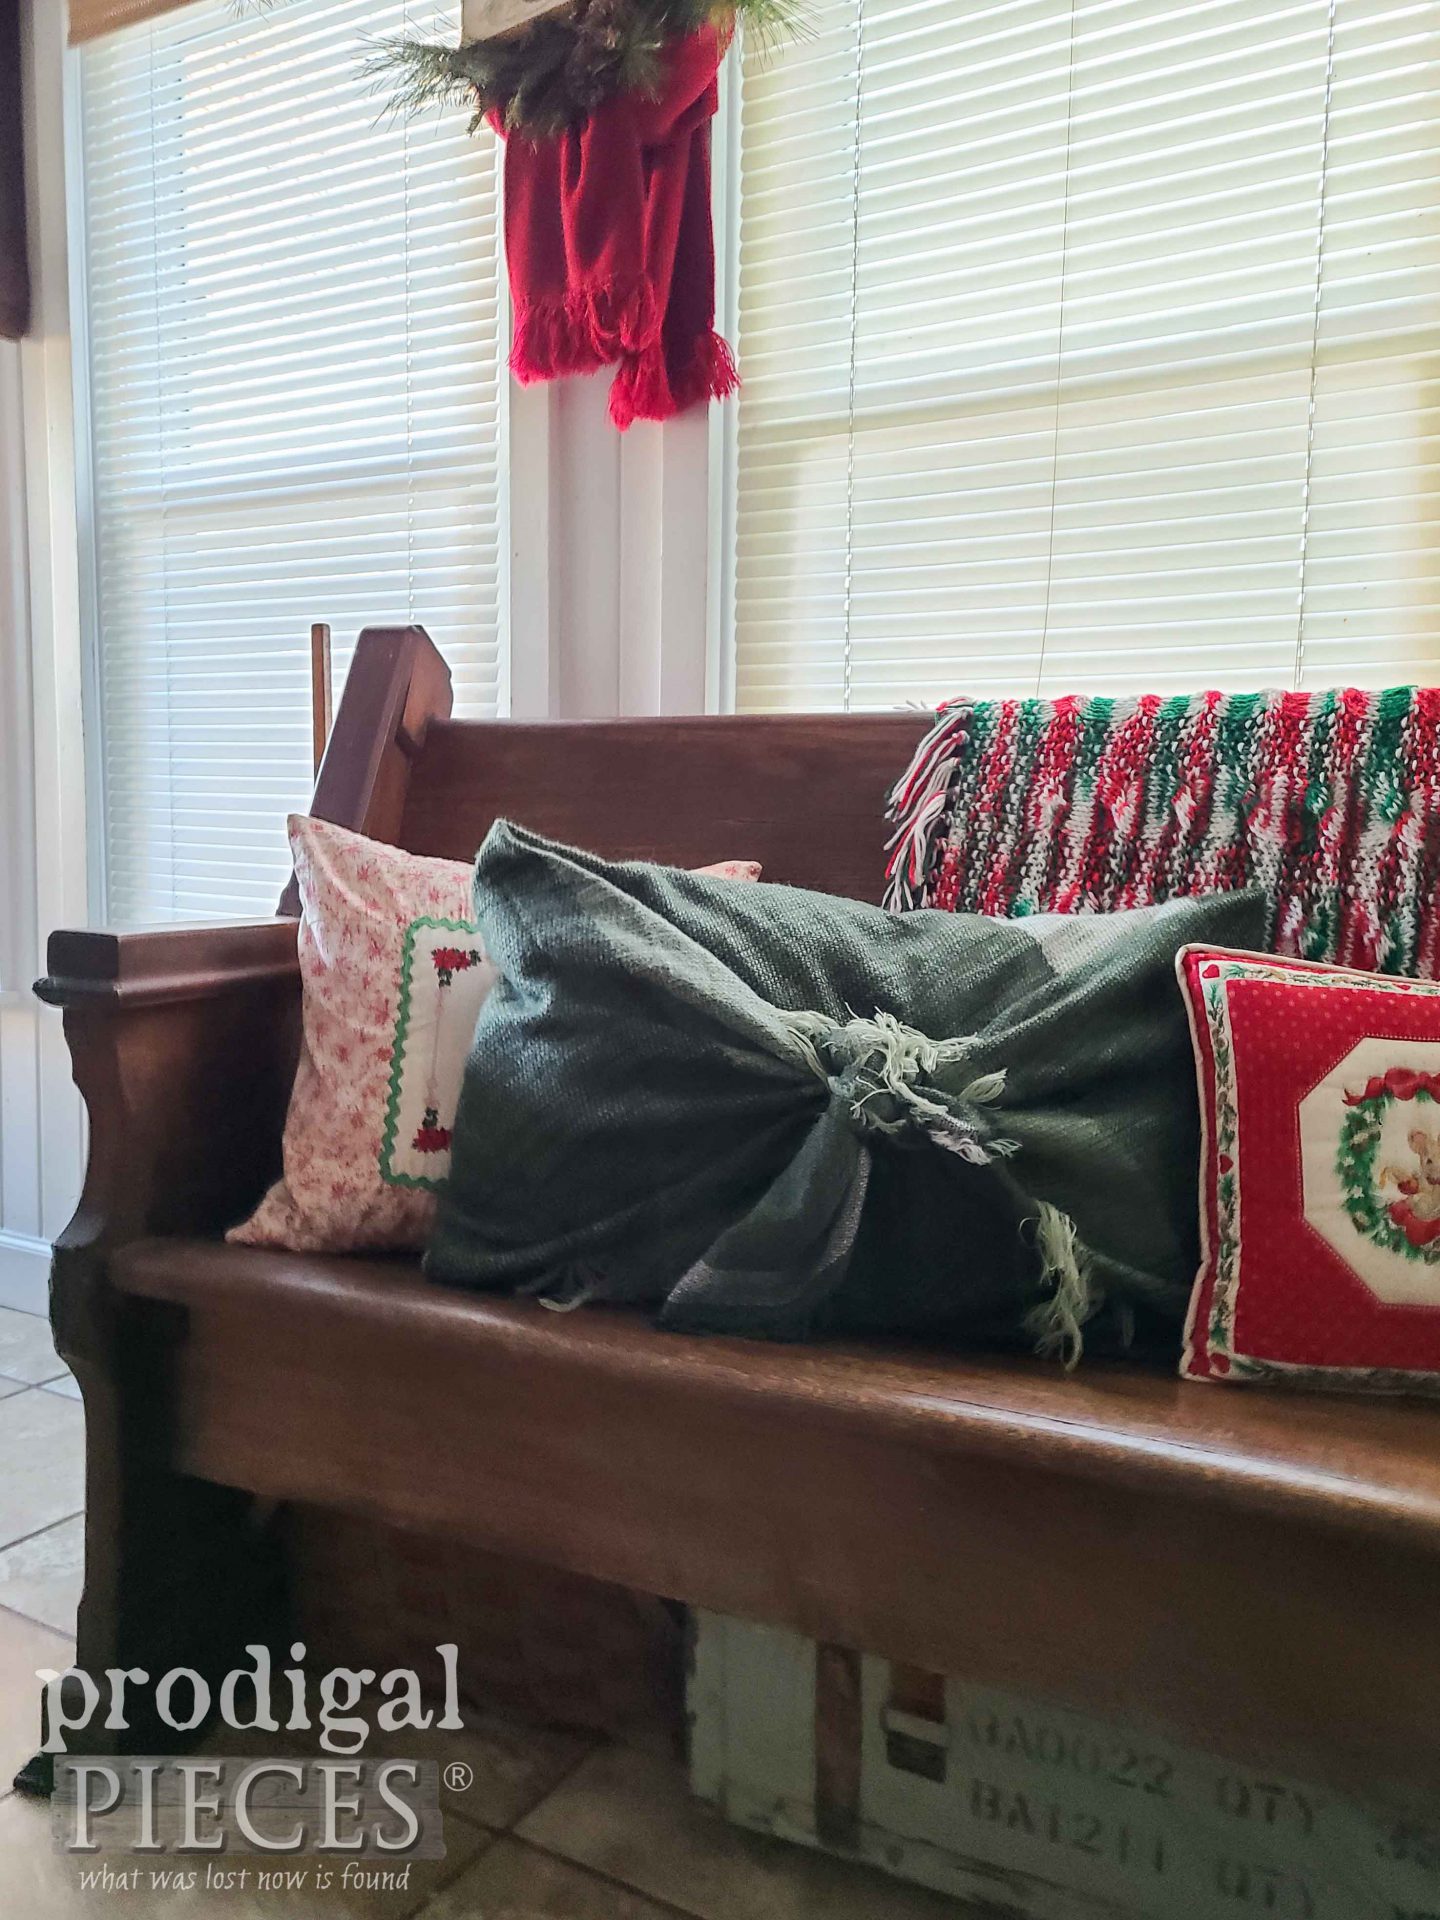 Refashioned Scarf into Throw Pillow Cover by Larissa of Prodigal Pieces | prodigalpieces.com #prodigalpieces #refashioned #diy #christmas